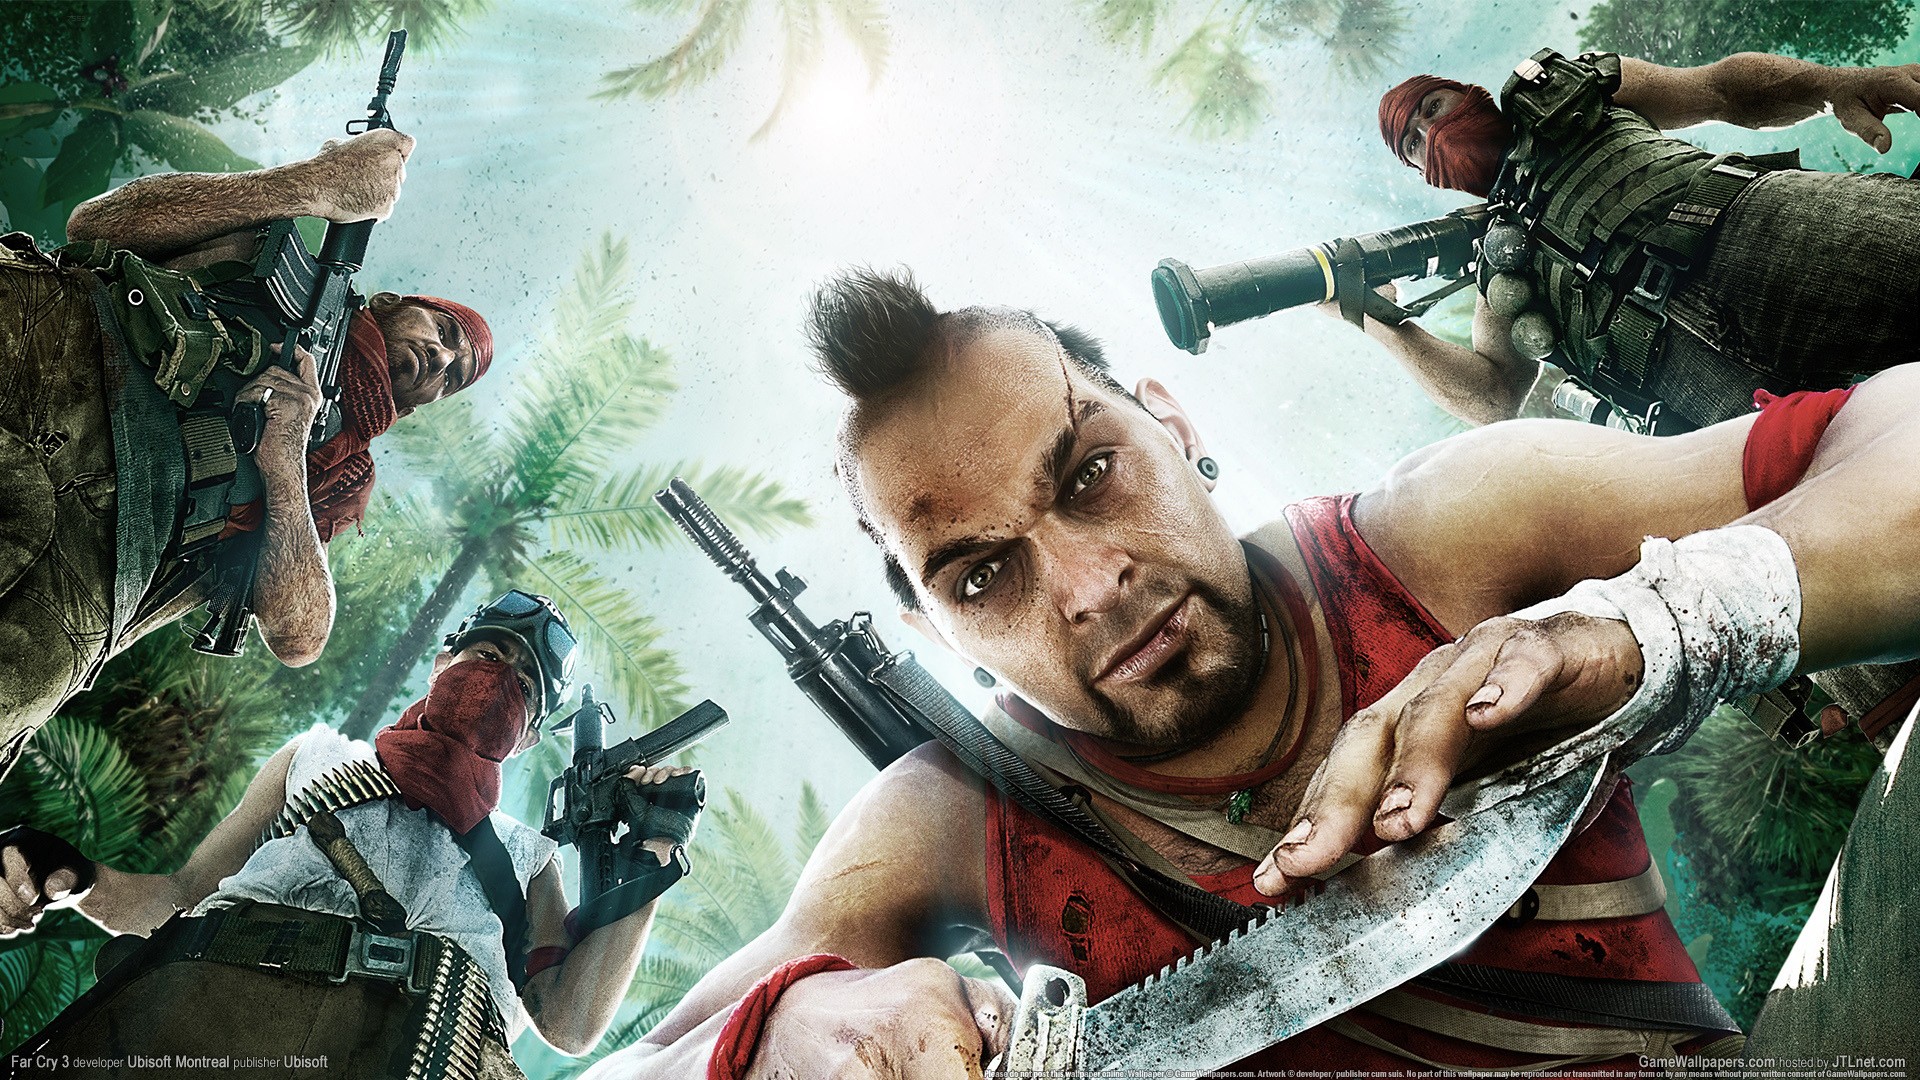 General 1920x1080 video games Far Cry 3 Vaas Ubisoft Far Cry Video Game Villains 2012 (Year) weapon knife video game art Vaas Montenegro video game man